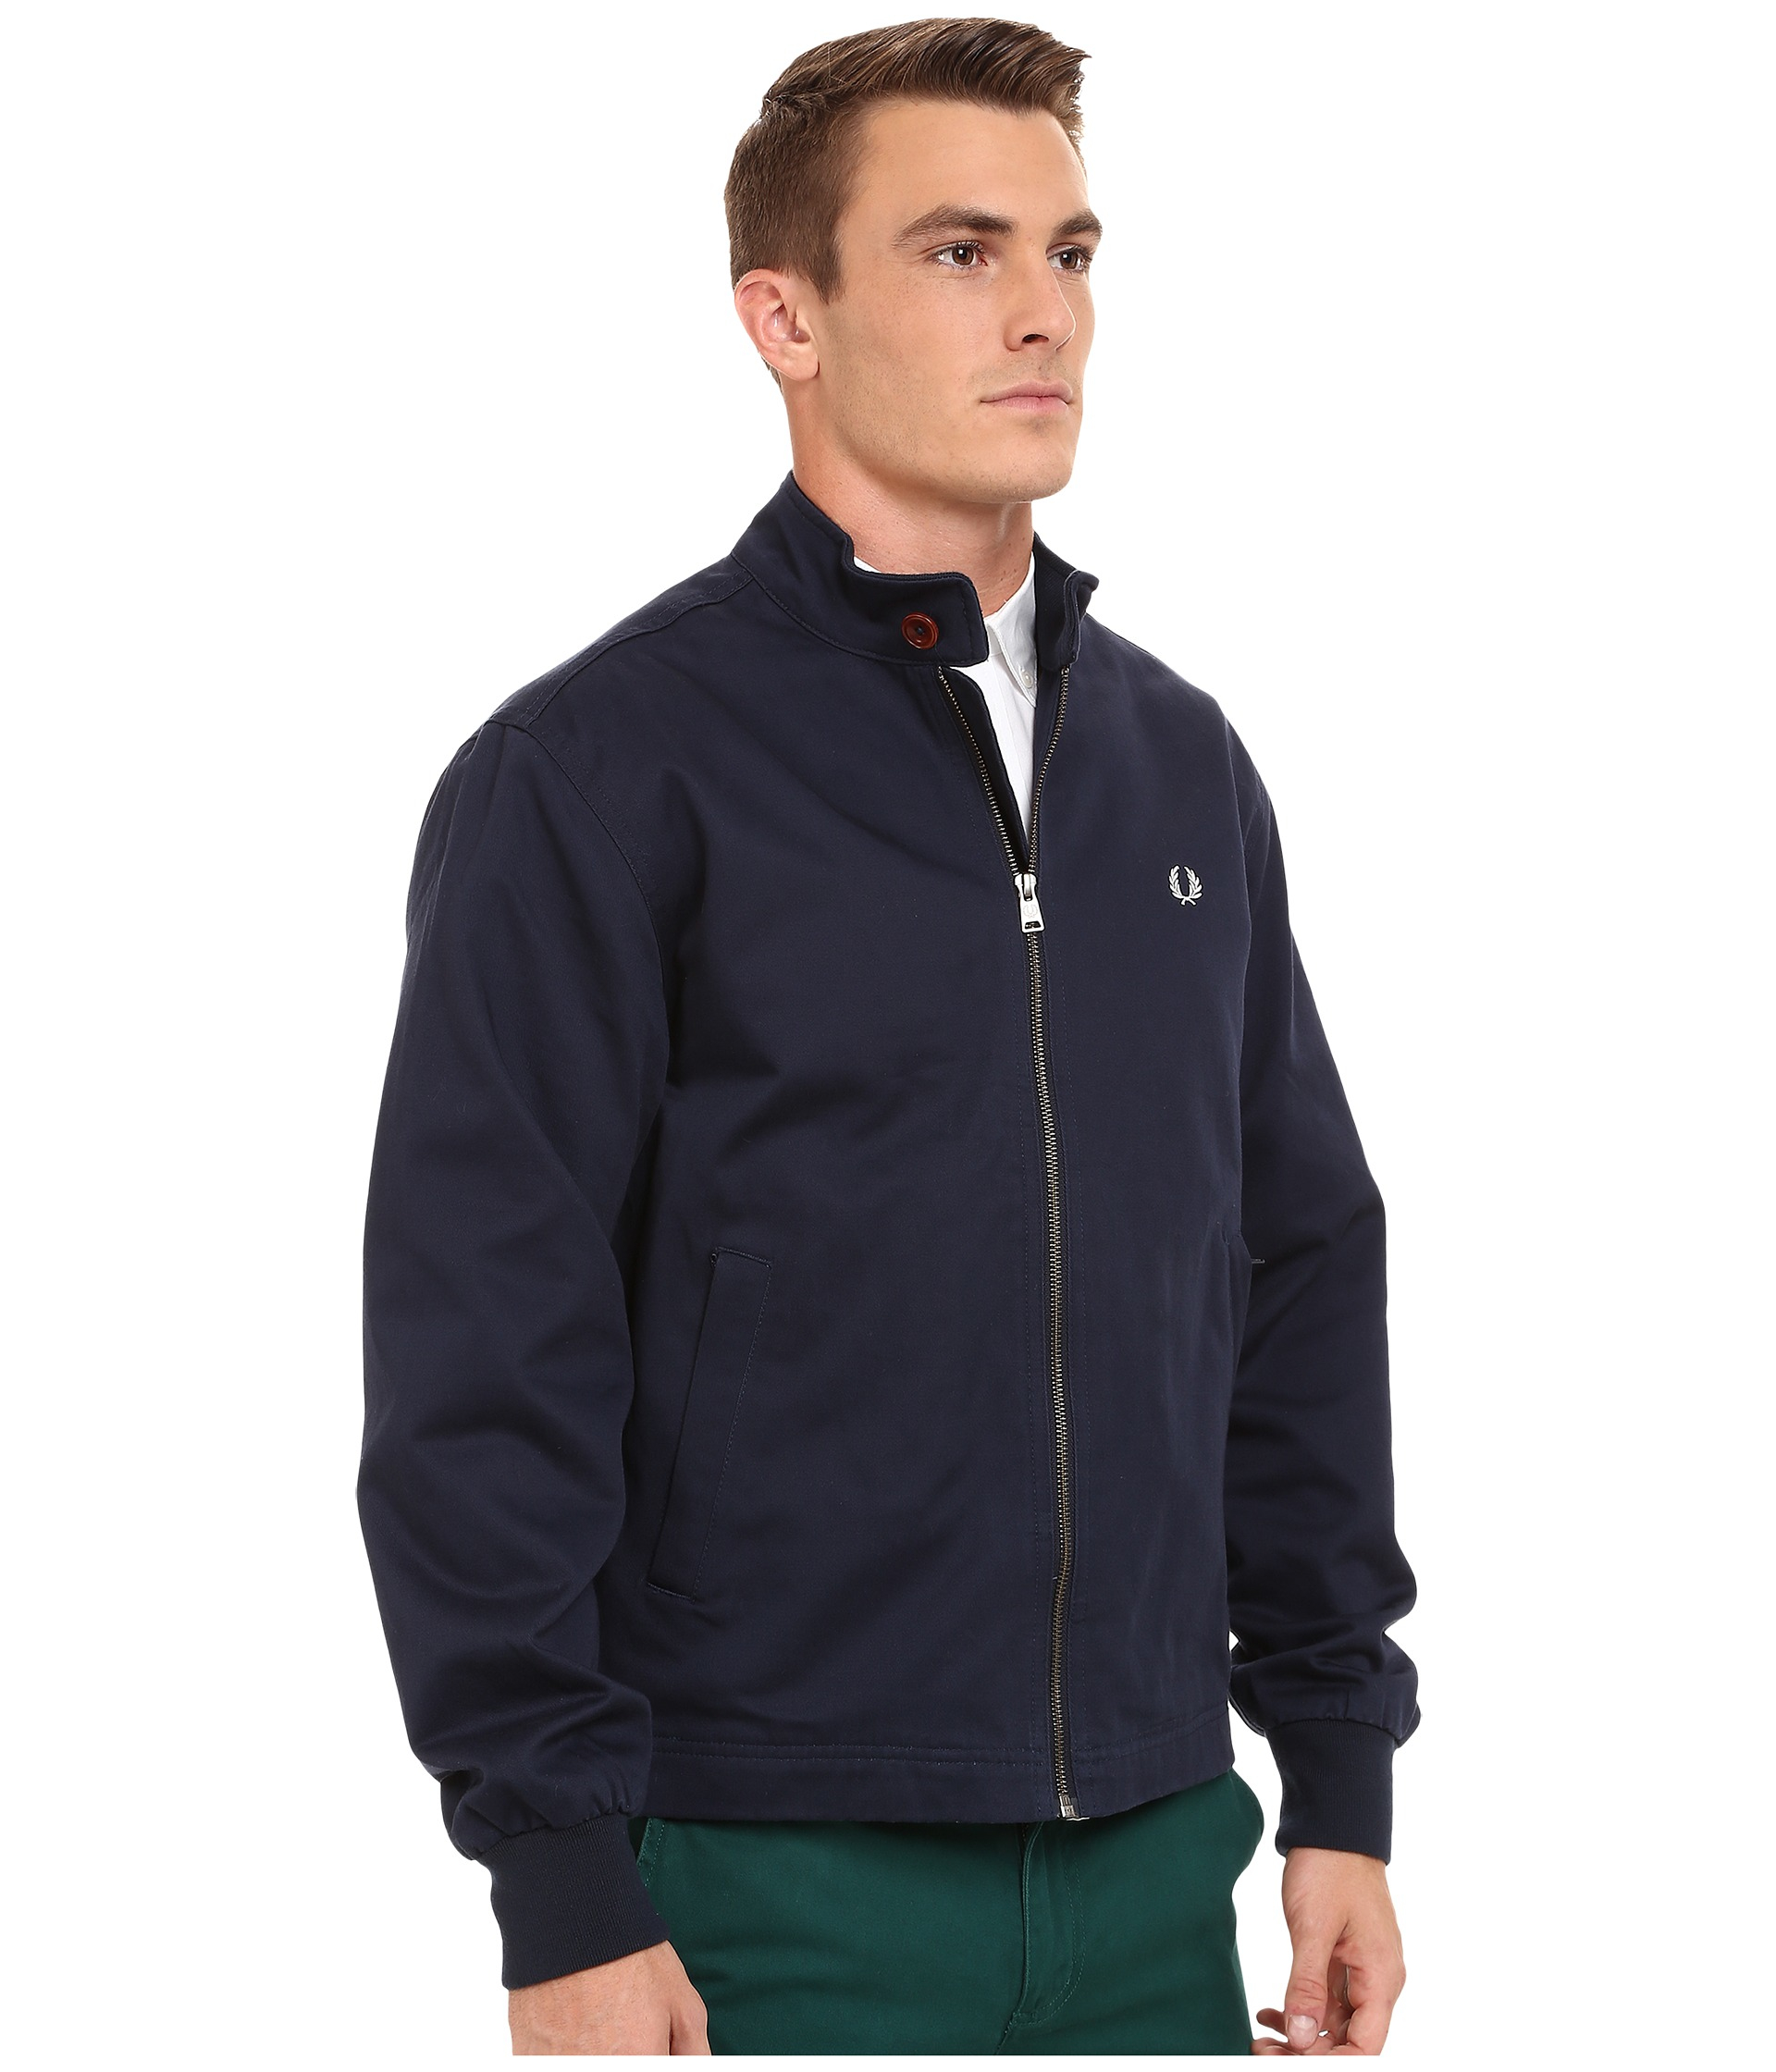 Fred Perry Scooter Jacket in Dark Carbon (Blue) for Men - Lyst